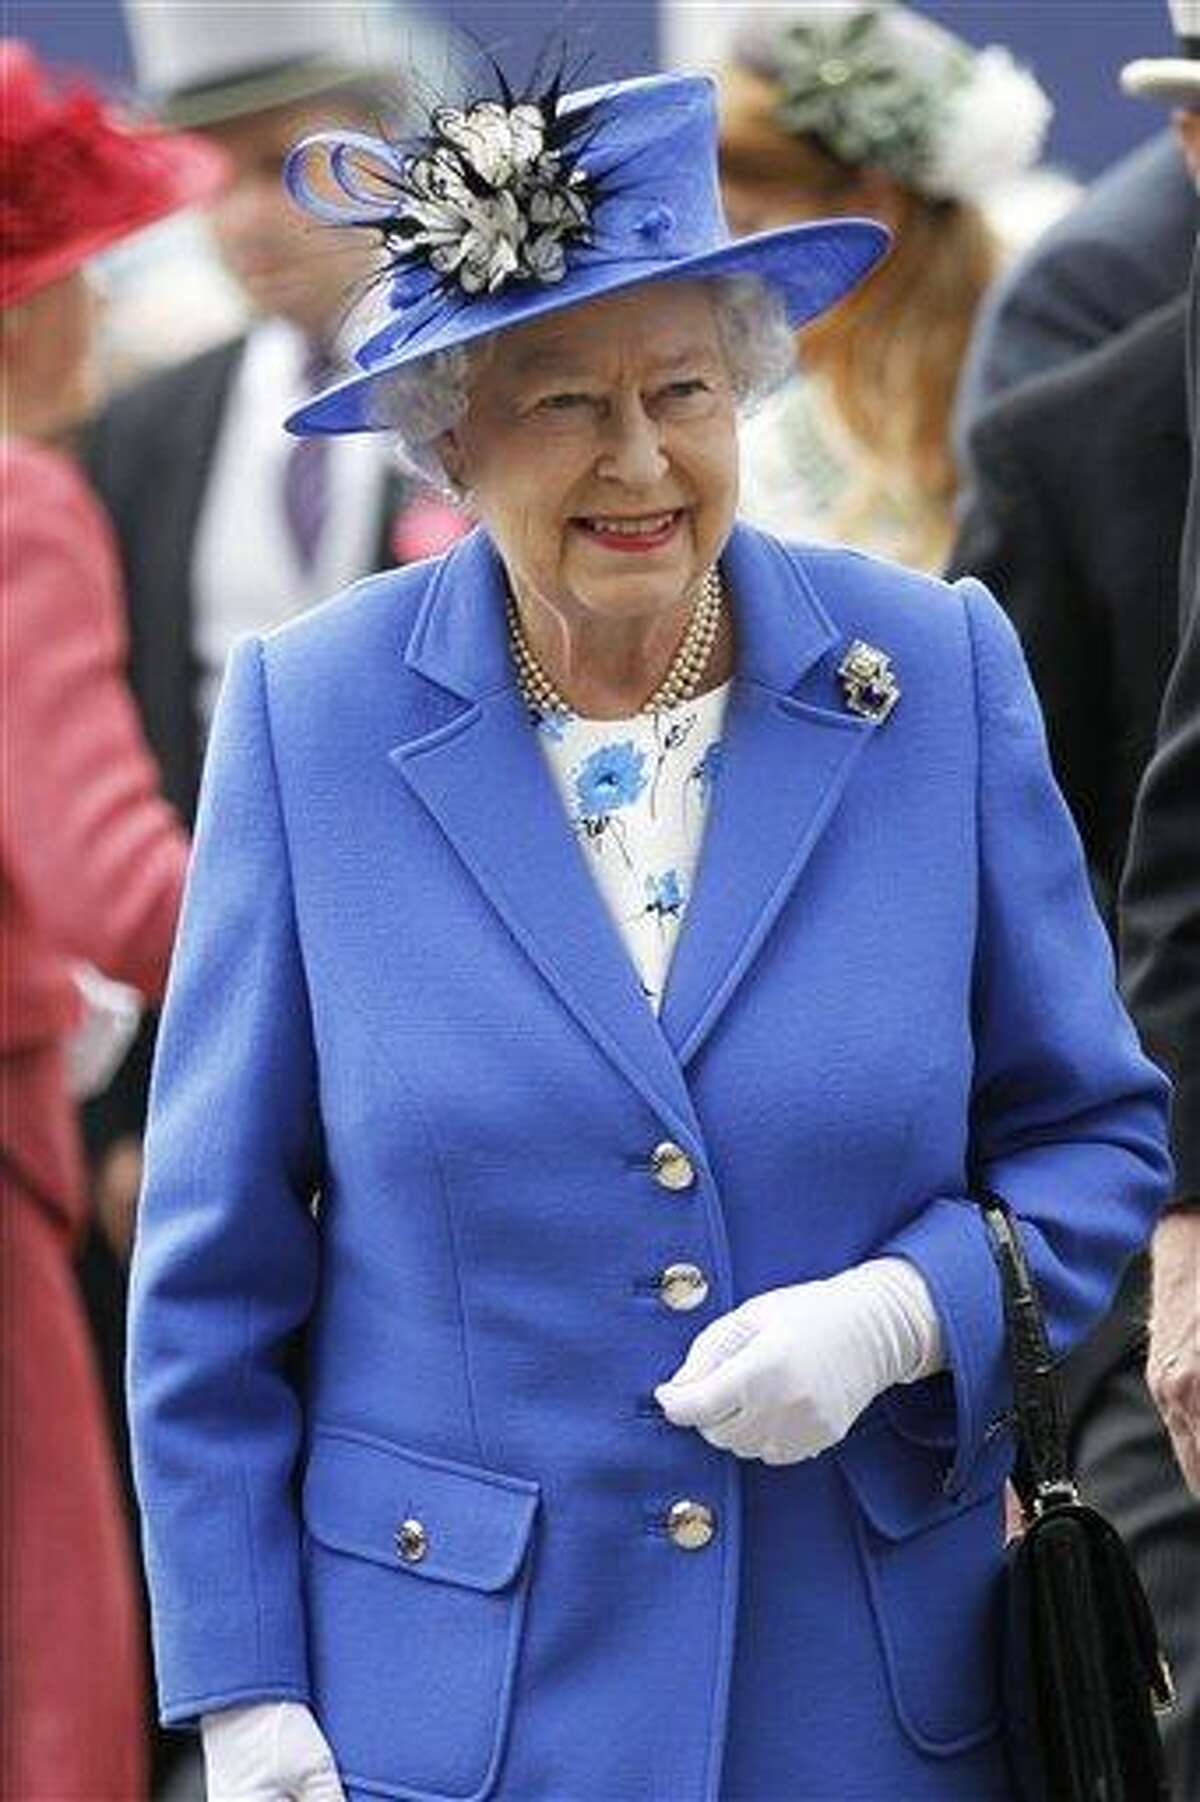 Britain's Queen Elizabeth II arrives for the Epsom Derby at Epsom race course, southern England at the start of a four-day Diamond Jubilee celebration to mark the 60th anniversary of the Queen's accession to the throne Saturday, June 2, 2012. The queen will celebrate Saturday at the Epsom Derby, a highlight of the horseracing calendar, and on Sunday she will lead a 1,000-boat flotilla on the River Thames. Monday's festivities include a pop concert in front of Buckingham Palace with Paul McCartney and Elton John, and festivities climax Tuesday with a religious service, a procession through the streets of London and the royal family's appearance on the palace balcony. (AP Photo/Sang Tan)